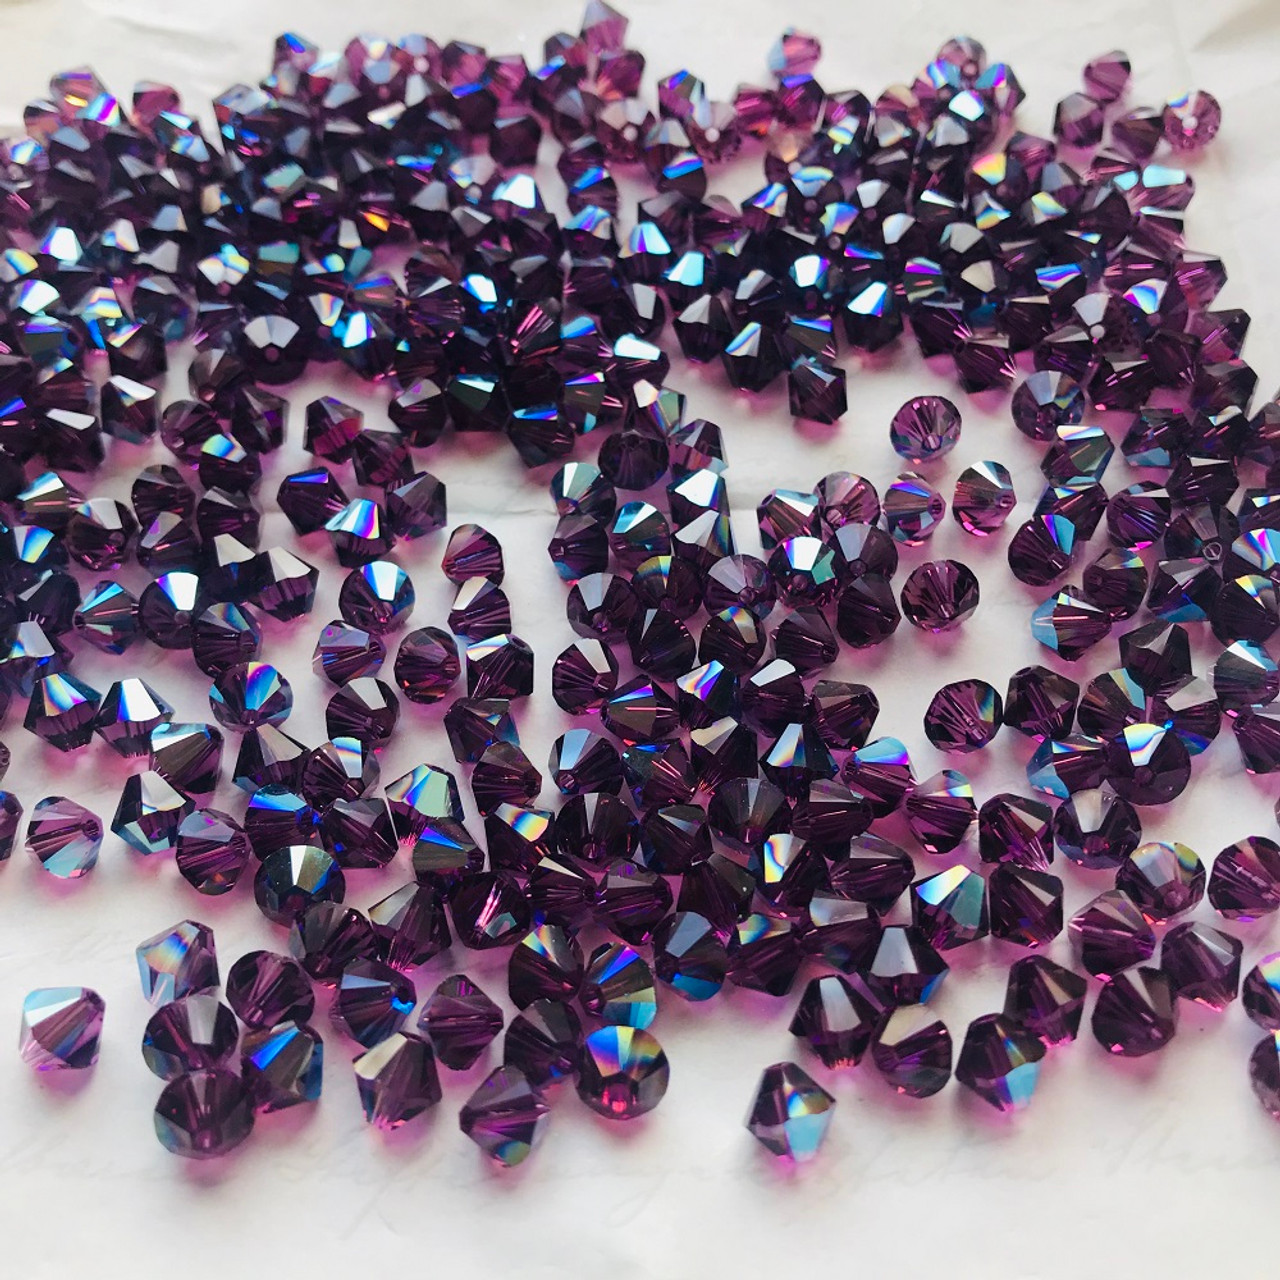 100pcs Authentic Preciosa Loose Faceted Bicone Crystal Beads 4mm Purple Amethyst Compatible with Swarovski Crystals #5301/5328 Pre-B411